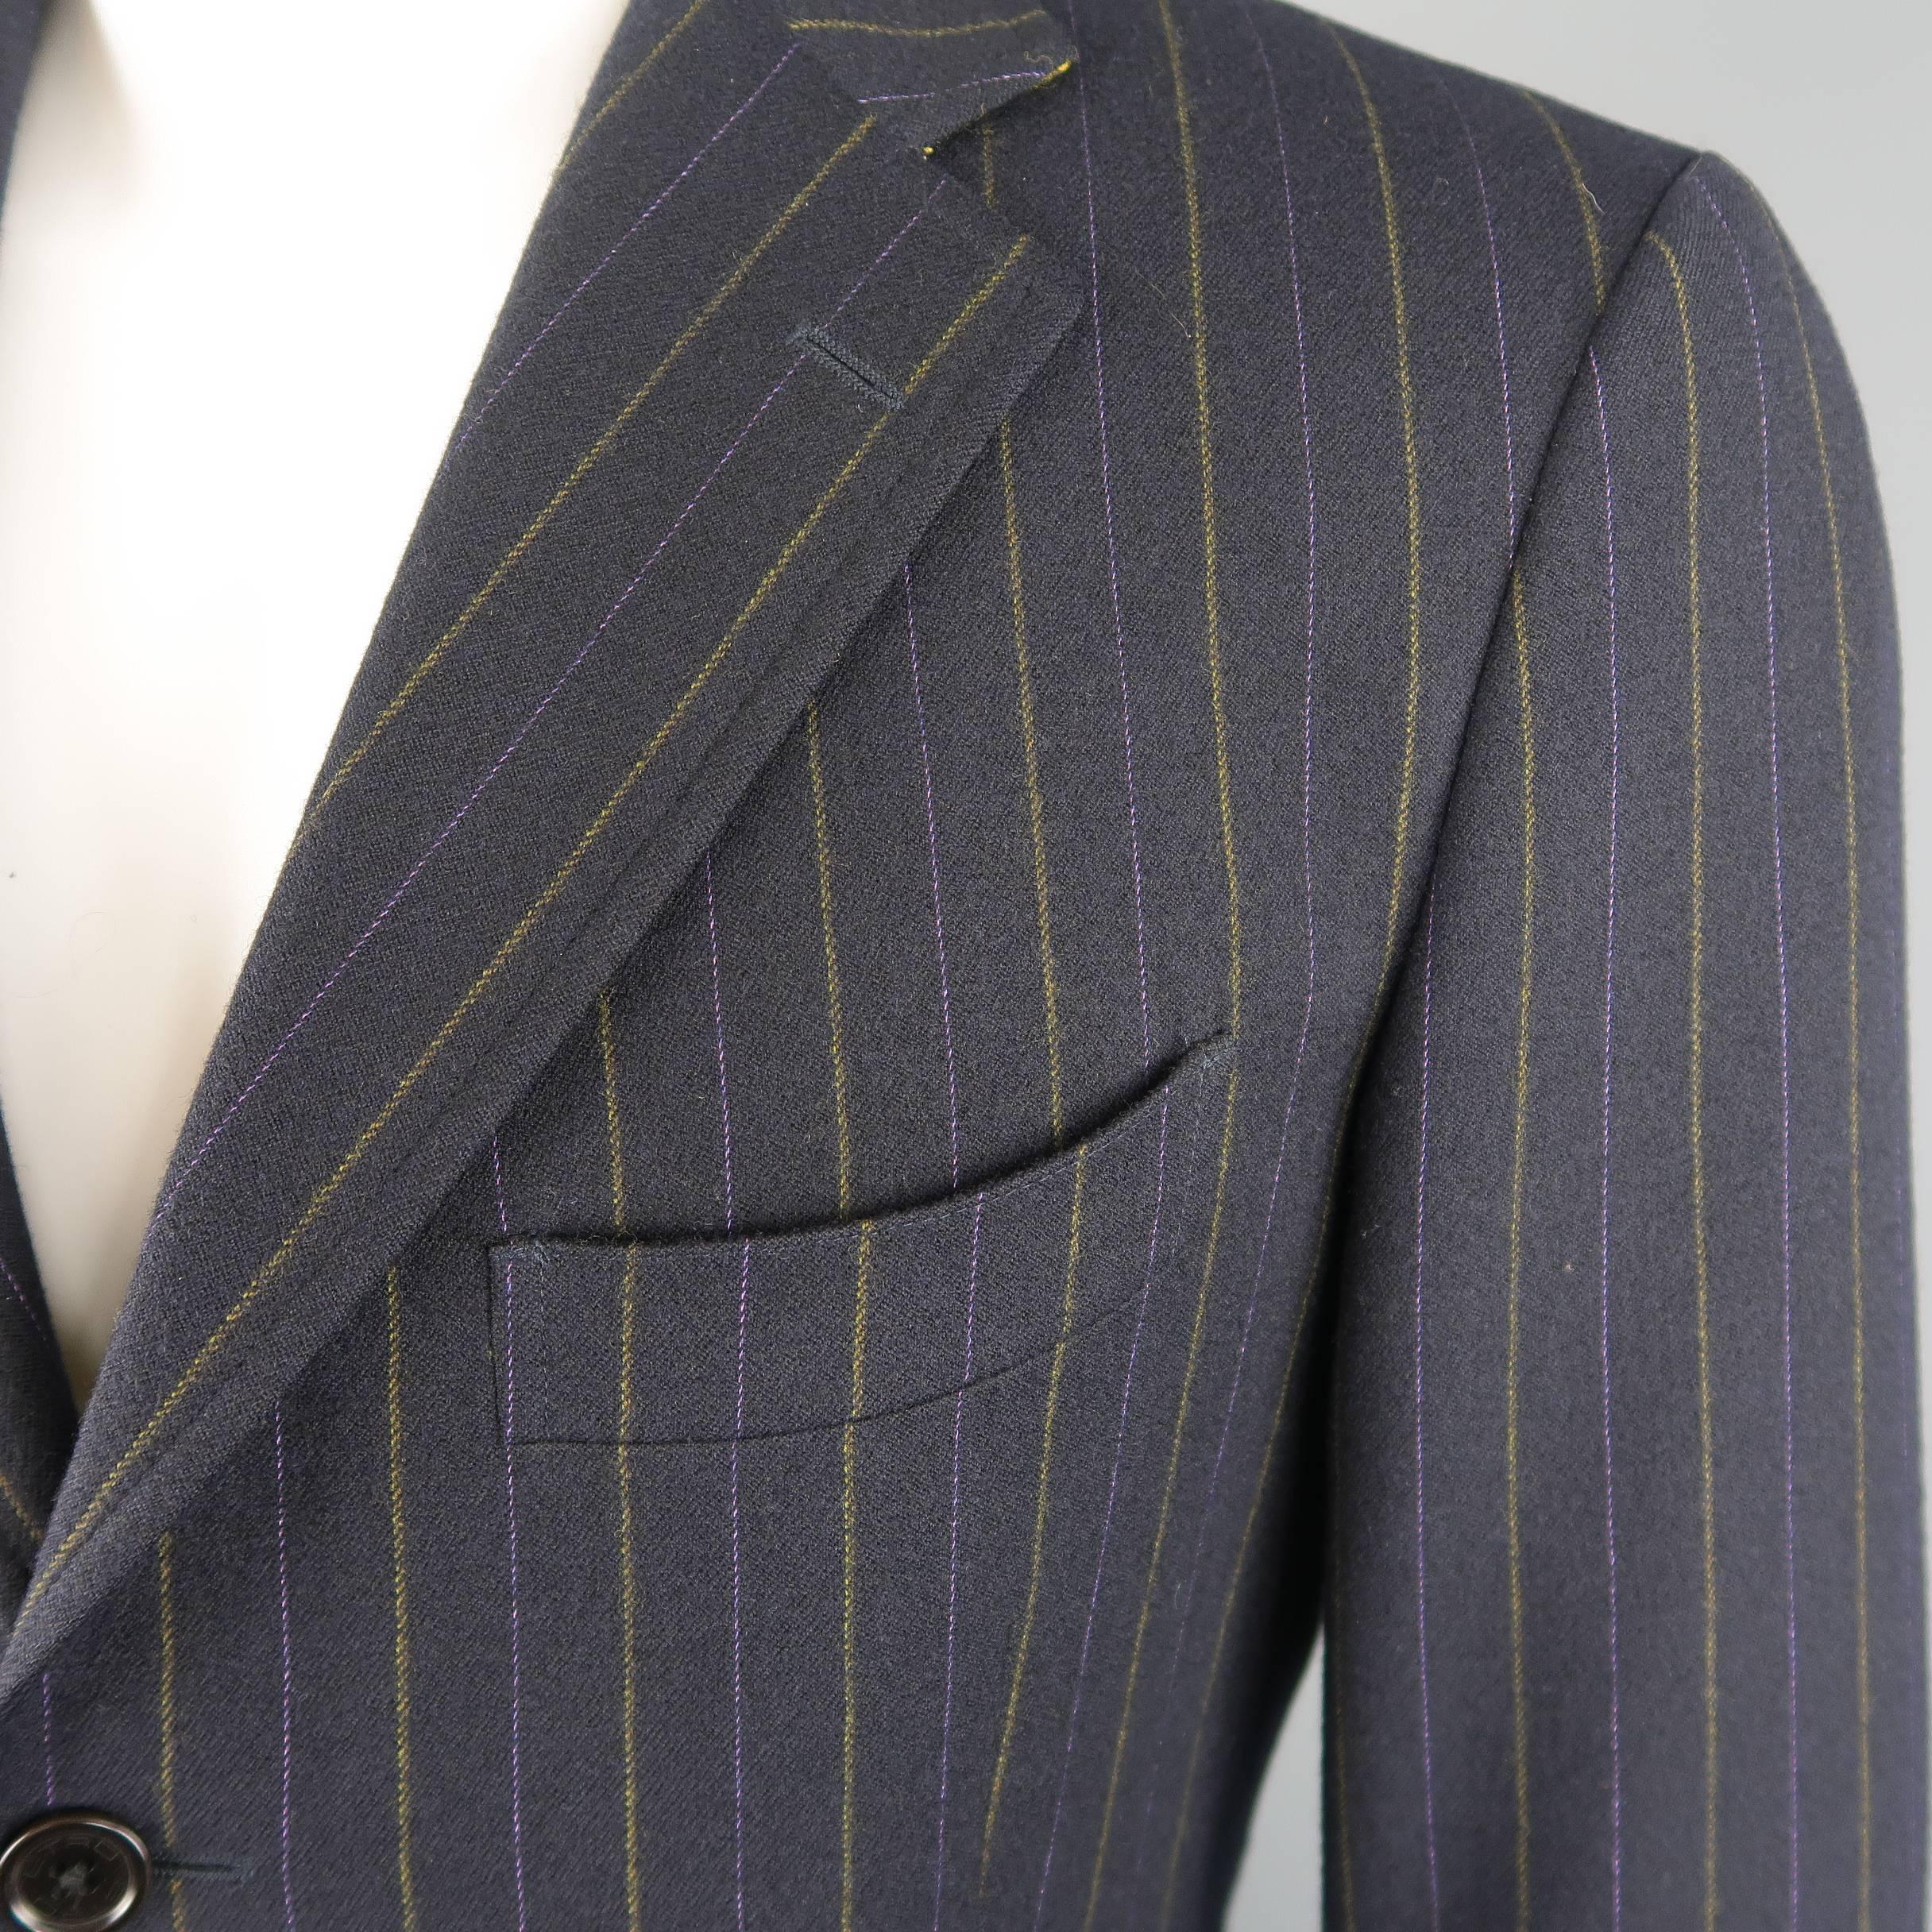 Single breasted ETRO sport coat comes in navy blue wool with purple and yellow pinstripe pattern, notch lapel, three button front, triple flap pockets, and yellow collar liner. Made in Italy.
 
Excellent Pre-Owned Condition.
Marked: IT 50
